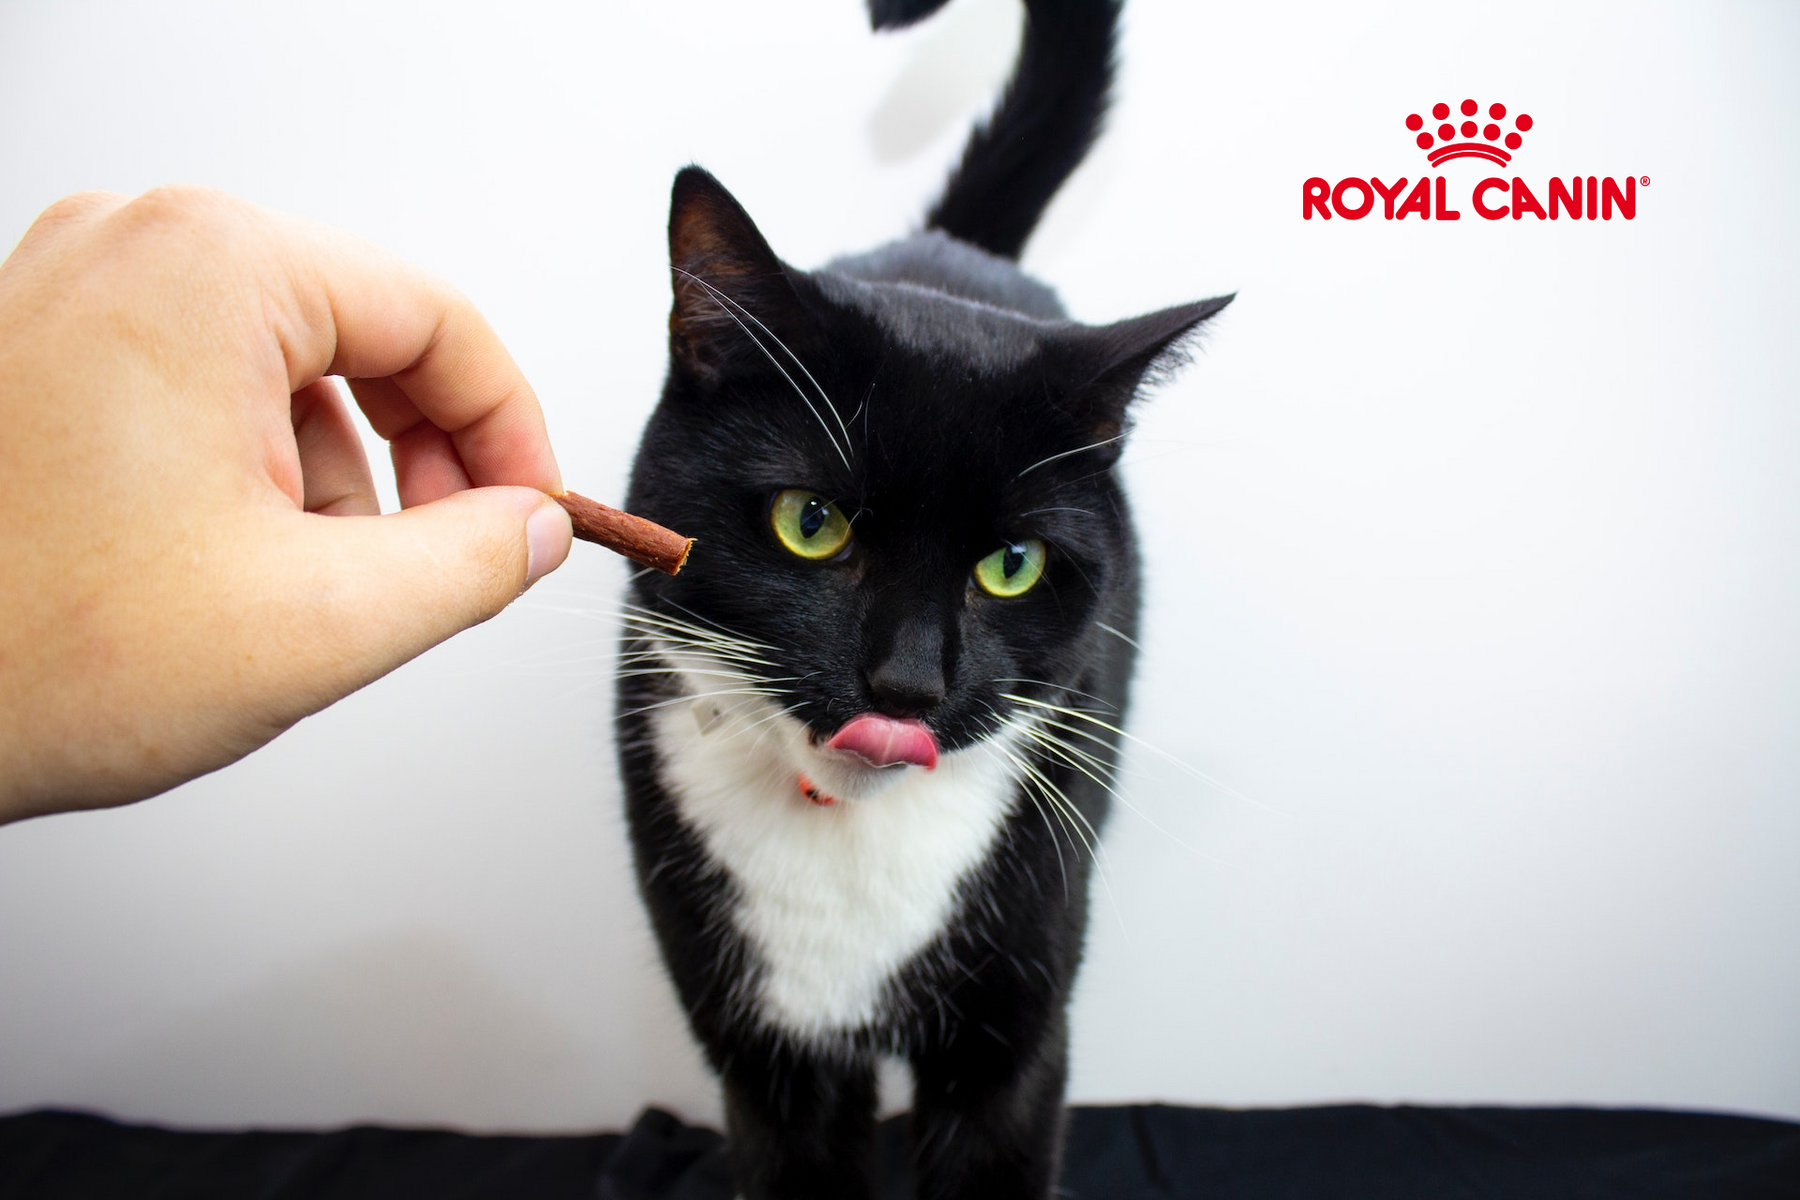 How to choose the perfect food for your cat from Royal Canin?